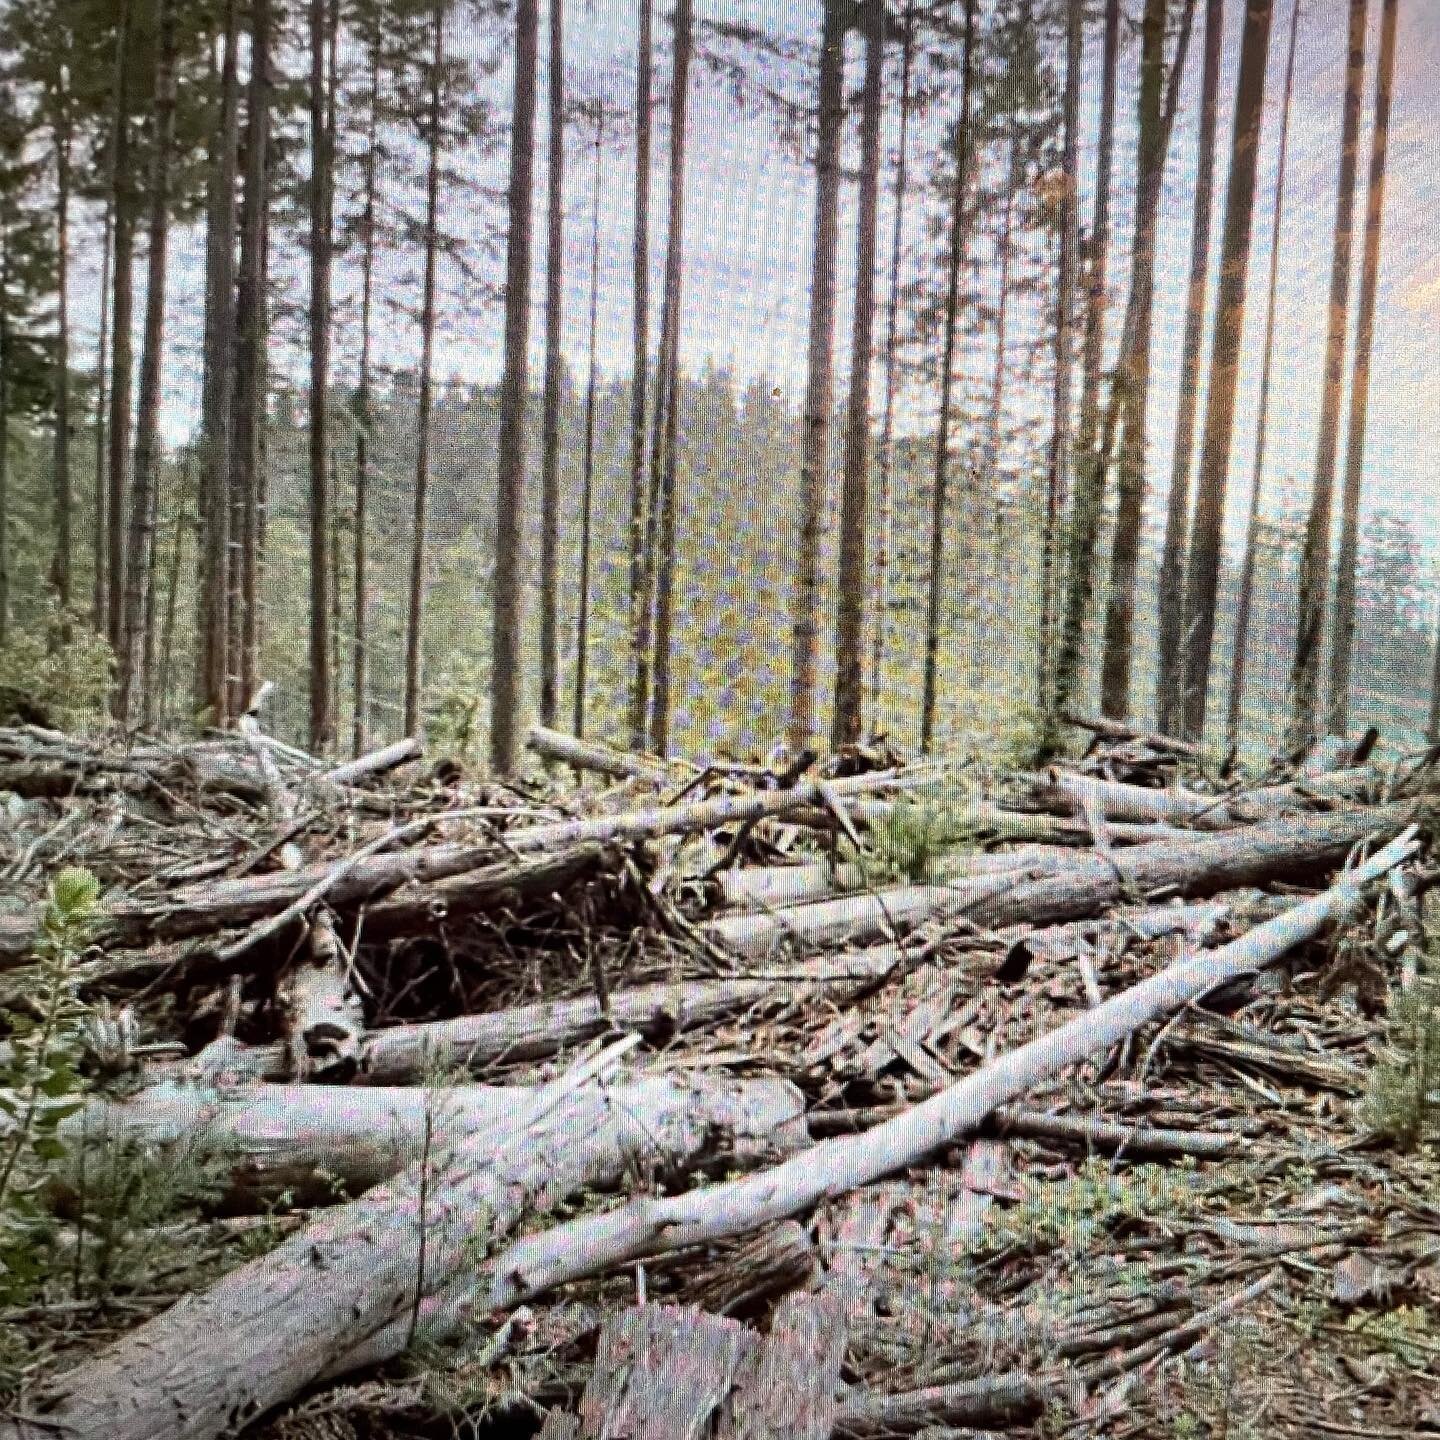 Did you know: logging is a major source of CO2 emissions because less than half the wood in a tree is usable as lumbar. The rest is burned or quickly decays in a landfill. (The John Muir Project). Help us to protect the forest in Guerneville from log